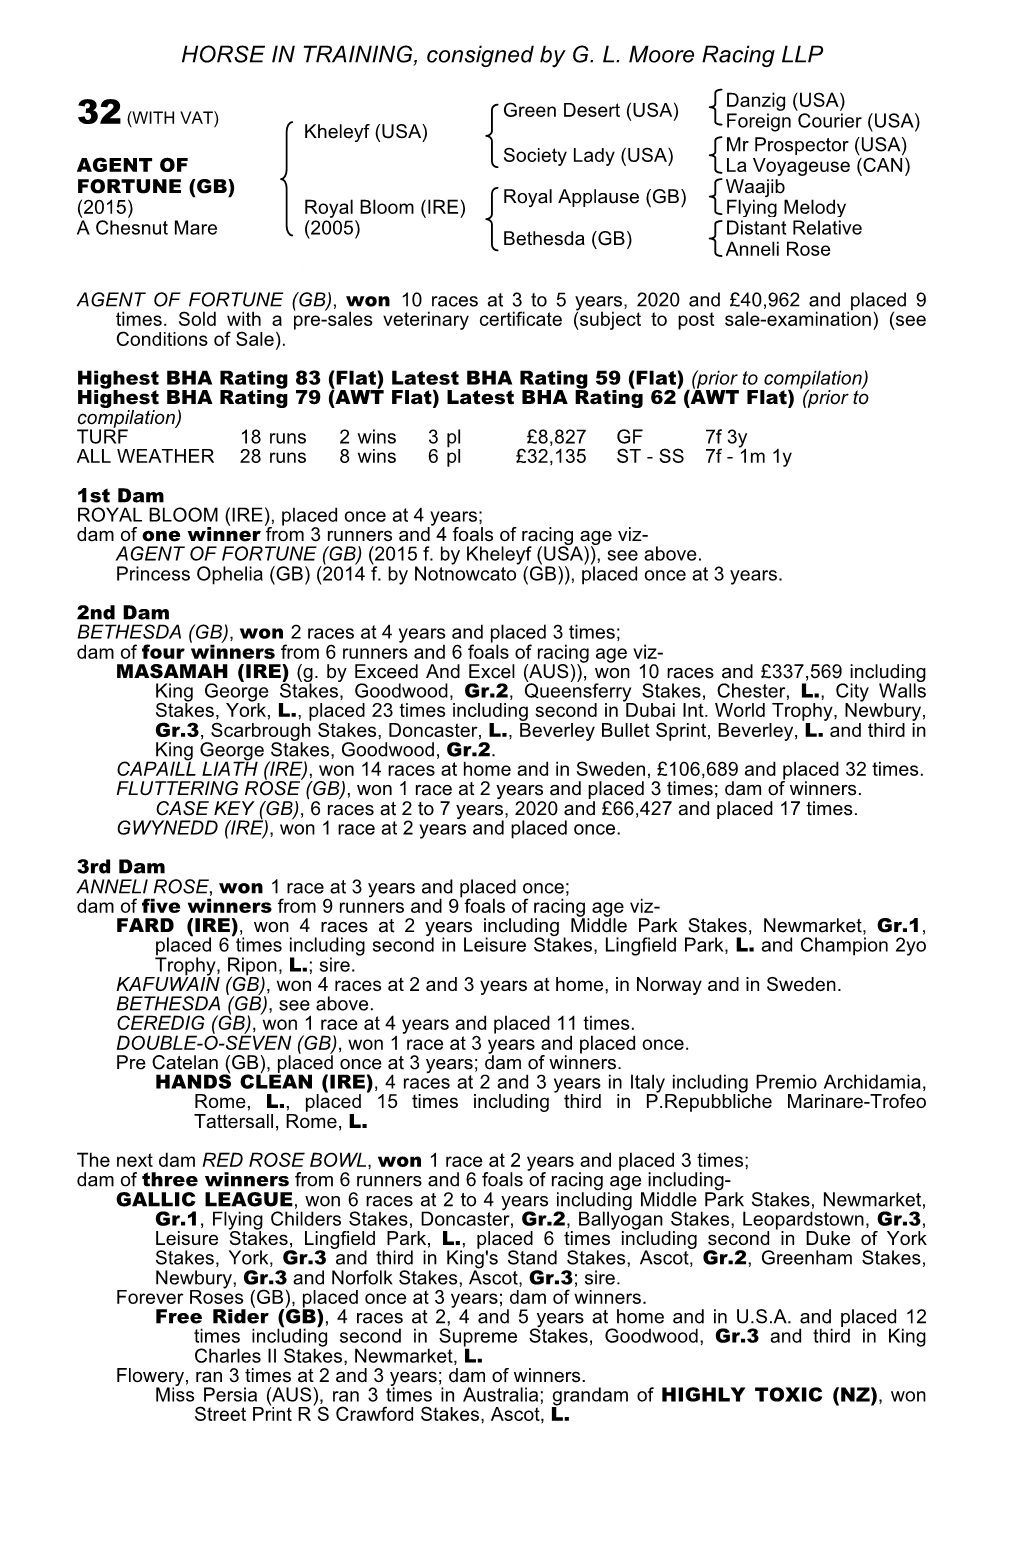 HORSE in TRAINING, Consigned by G. L. Moore Racing LLP